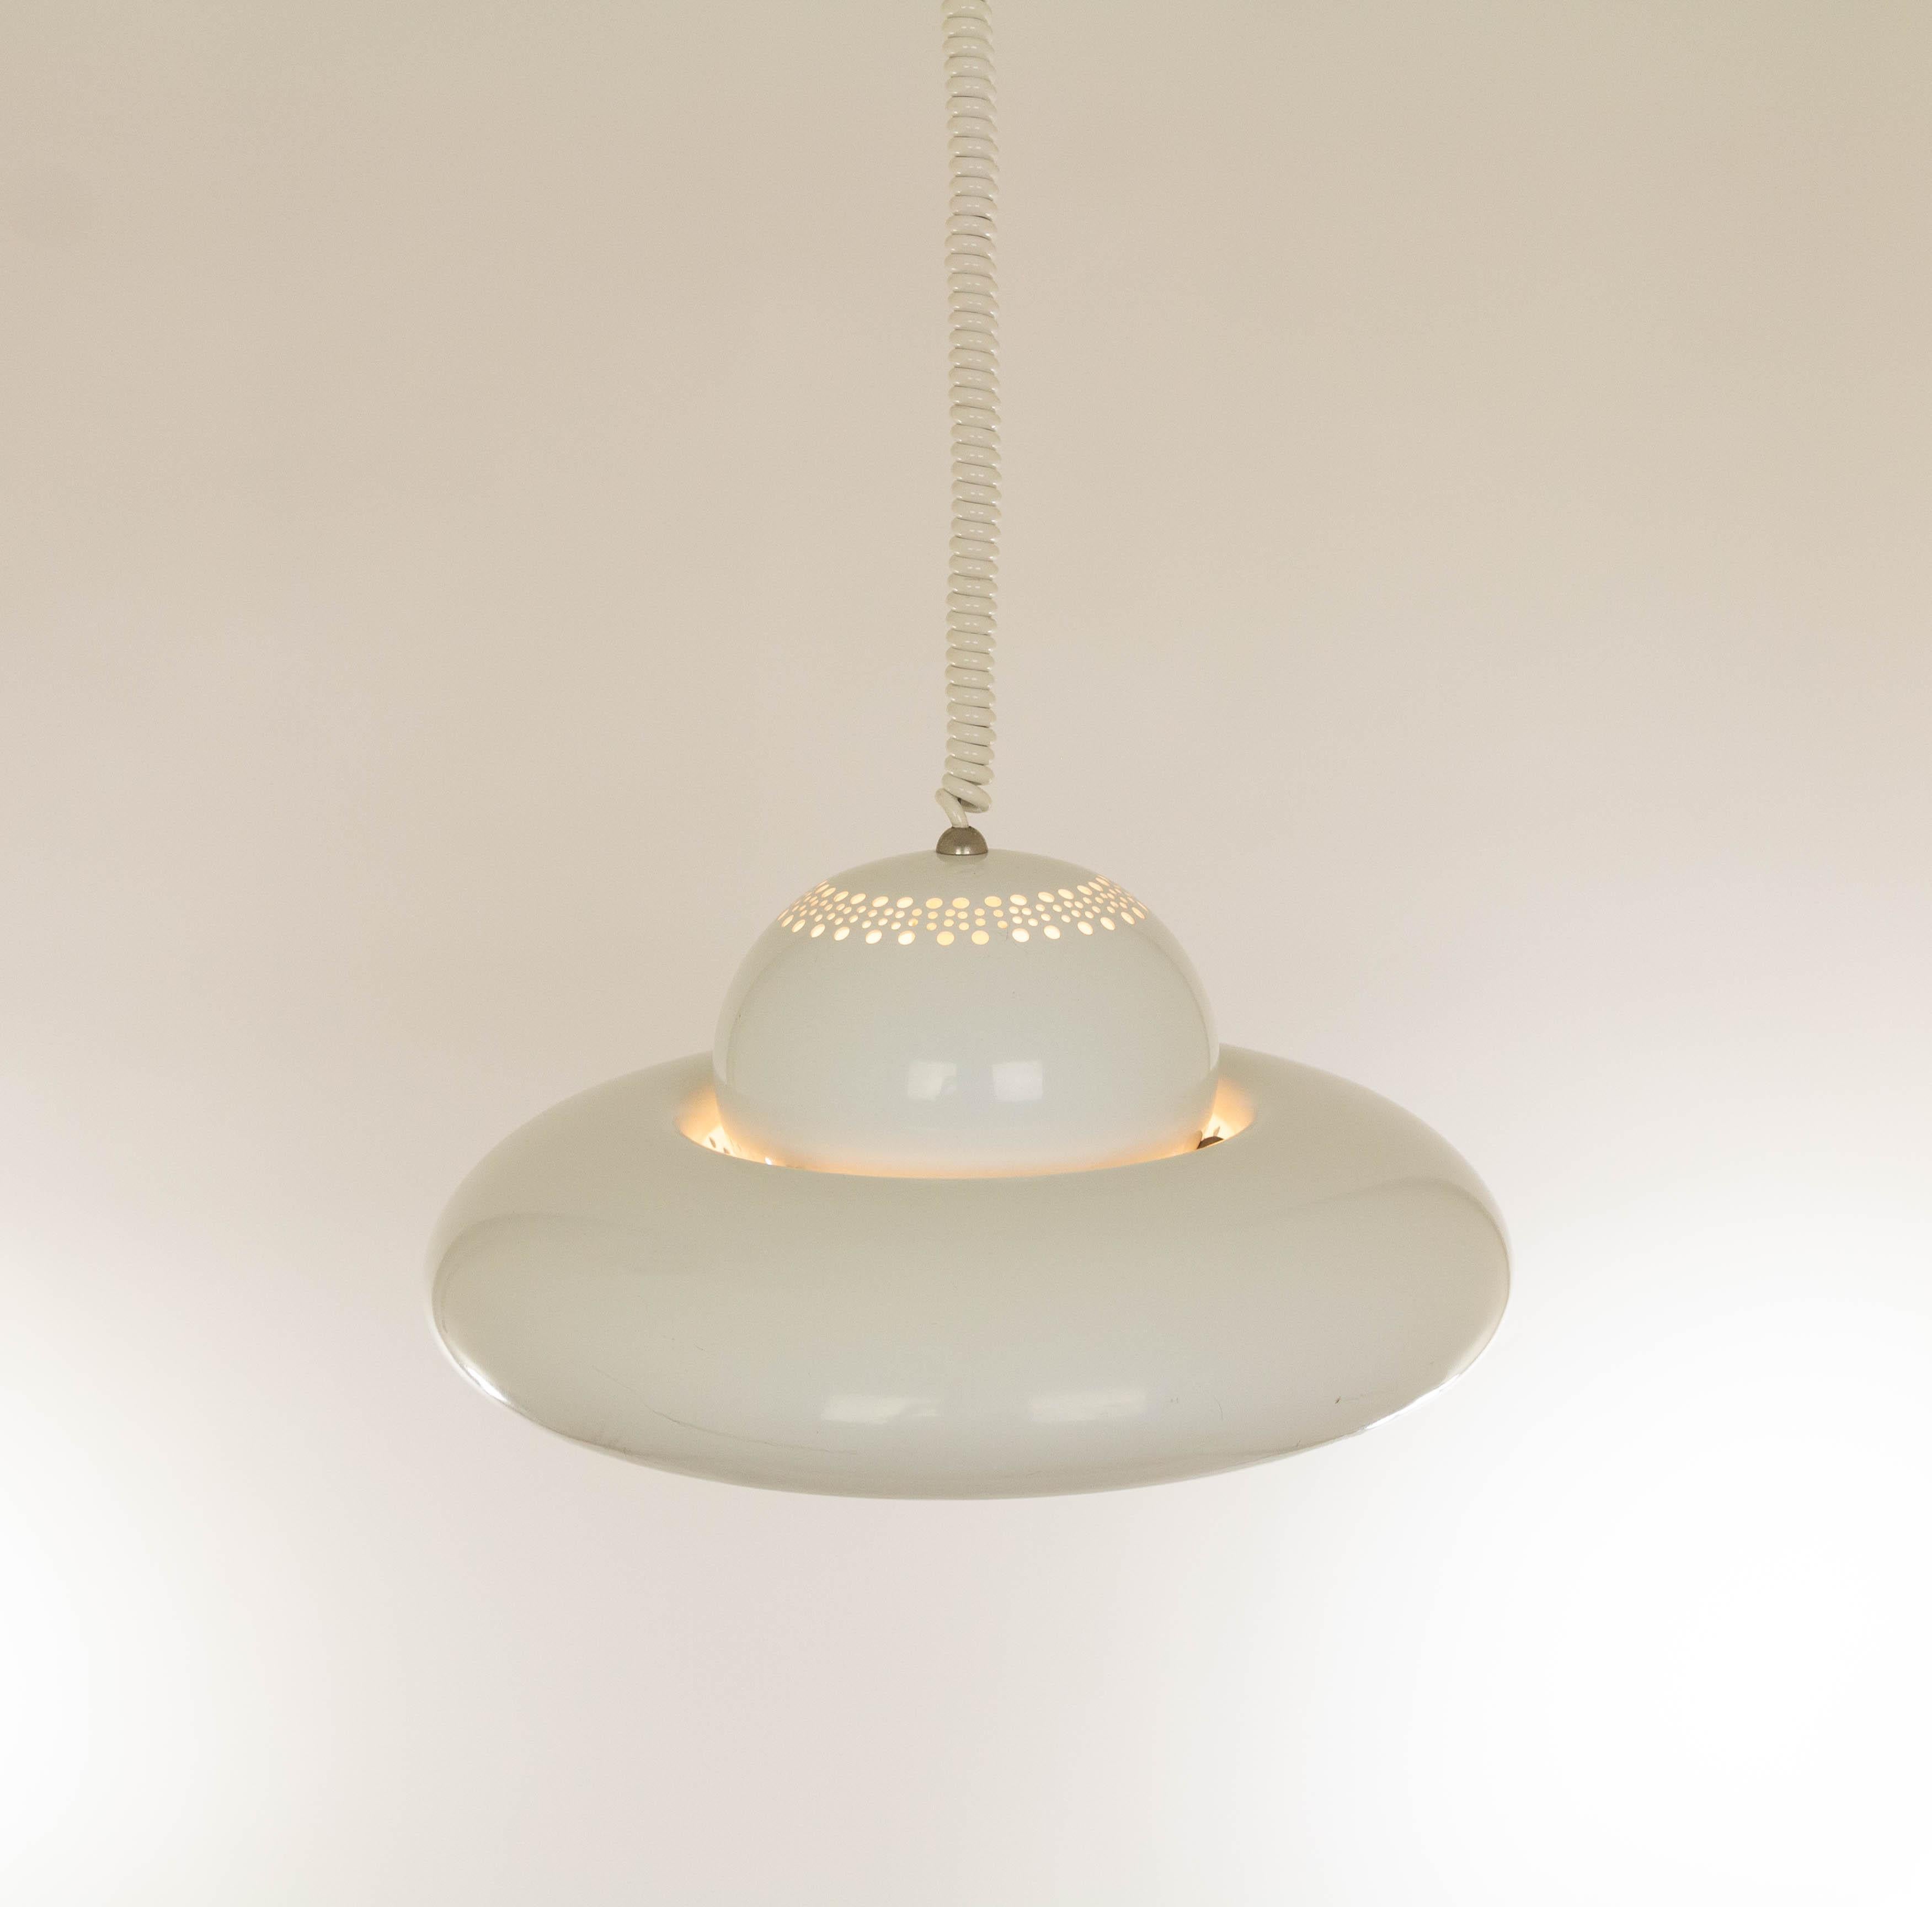 White Fior di Loto pendant designed by Tobia and Afra Scarpa for Italian Lighting manufacturer Flos in 1963.

In a Flos catalogue we found this description: 